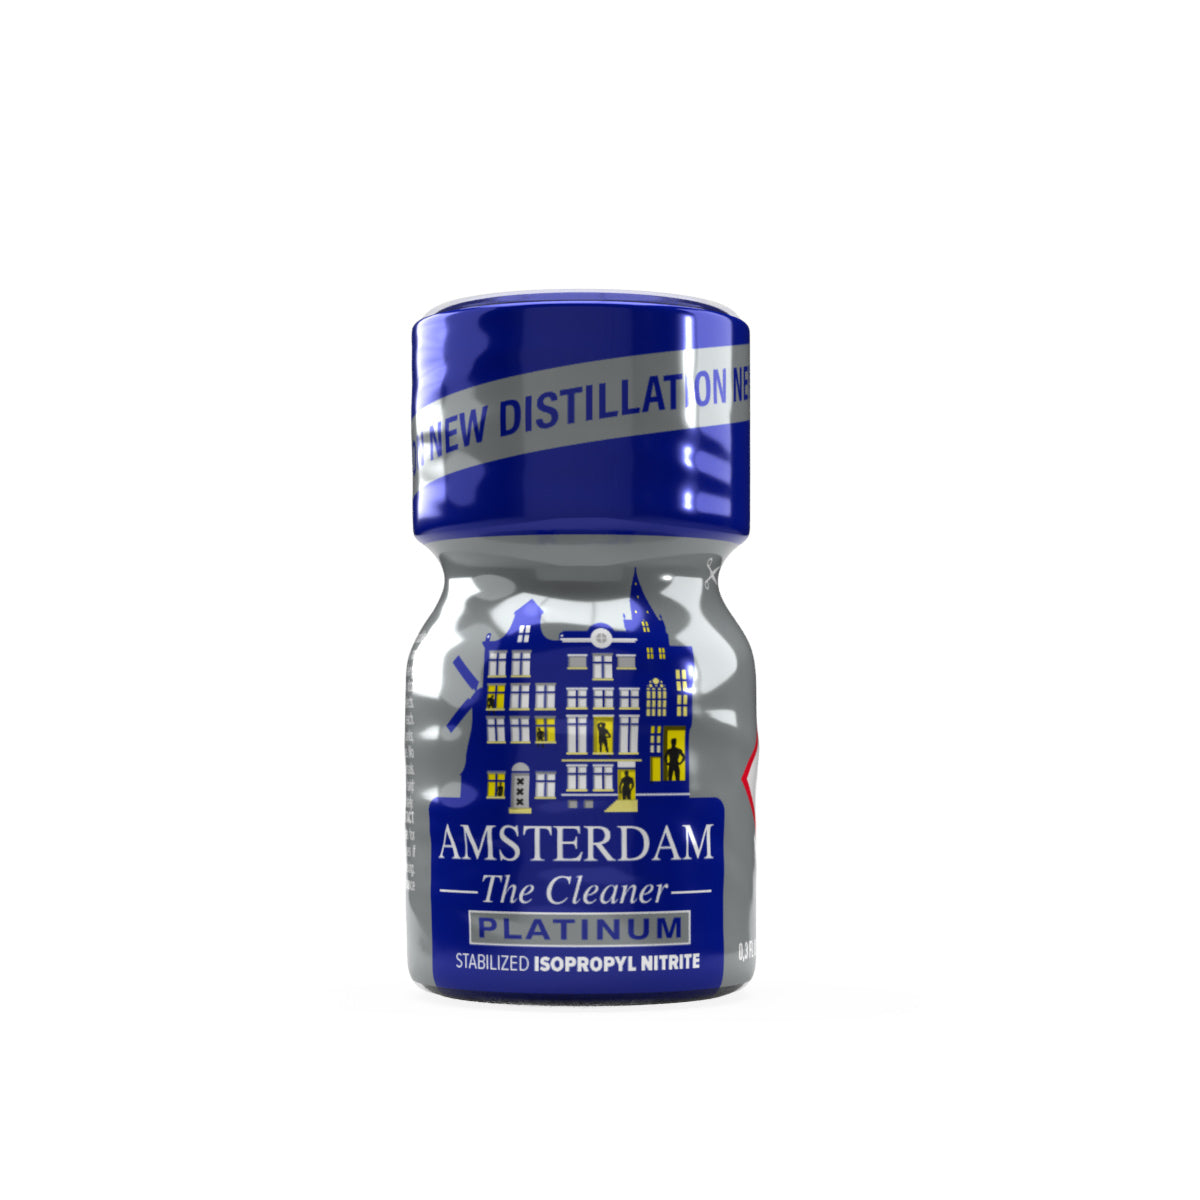 A product photo of a 10ml bottle of Amsterdam Platinum Poppers.